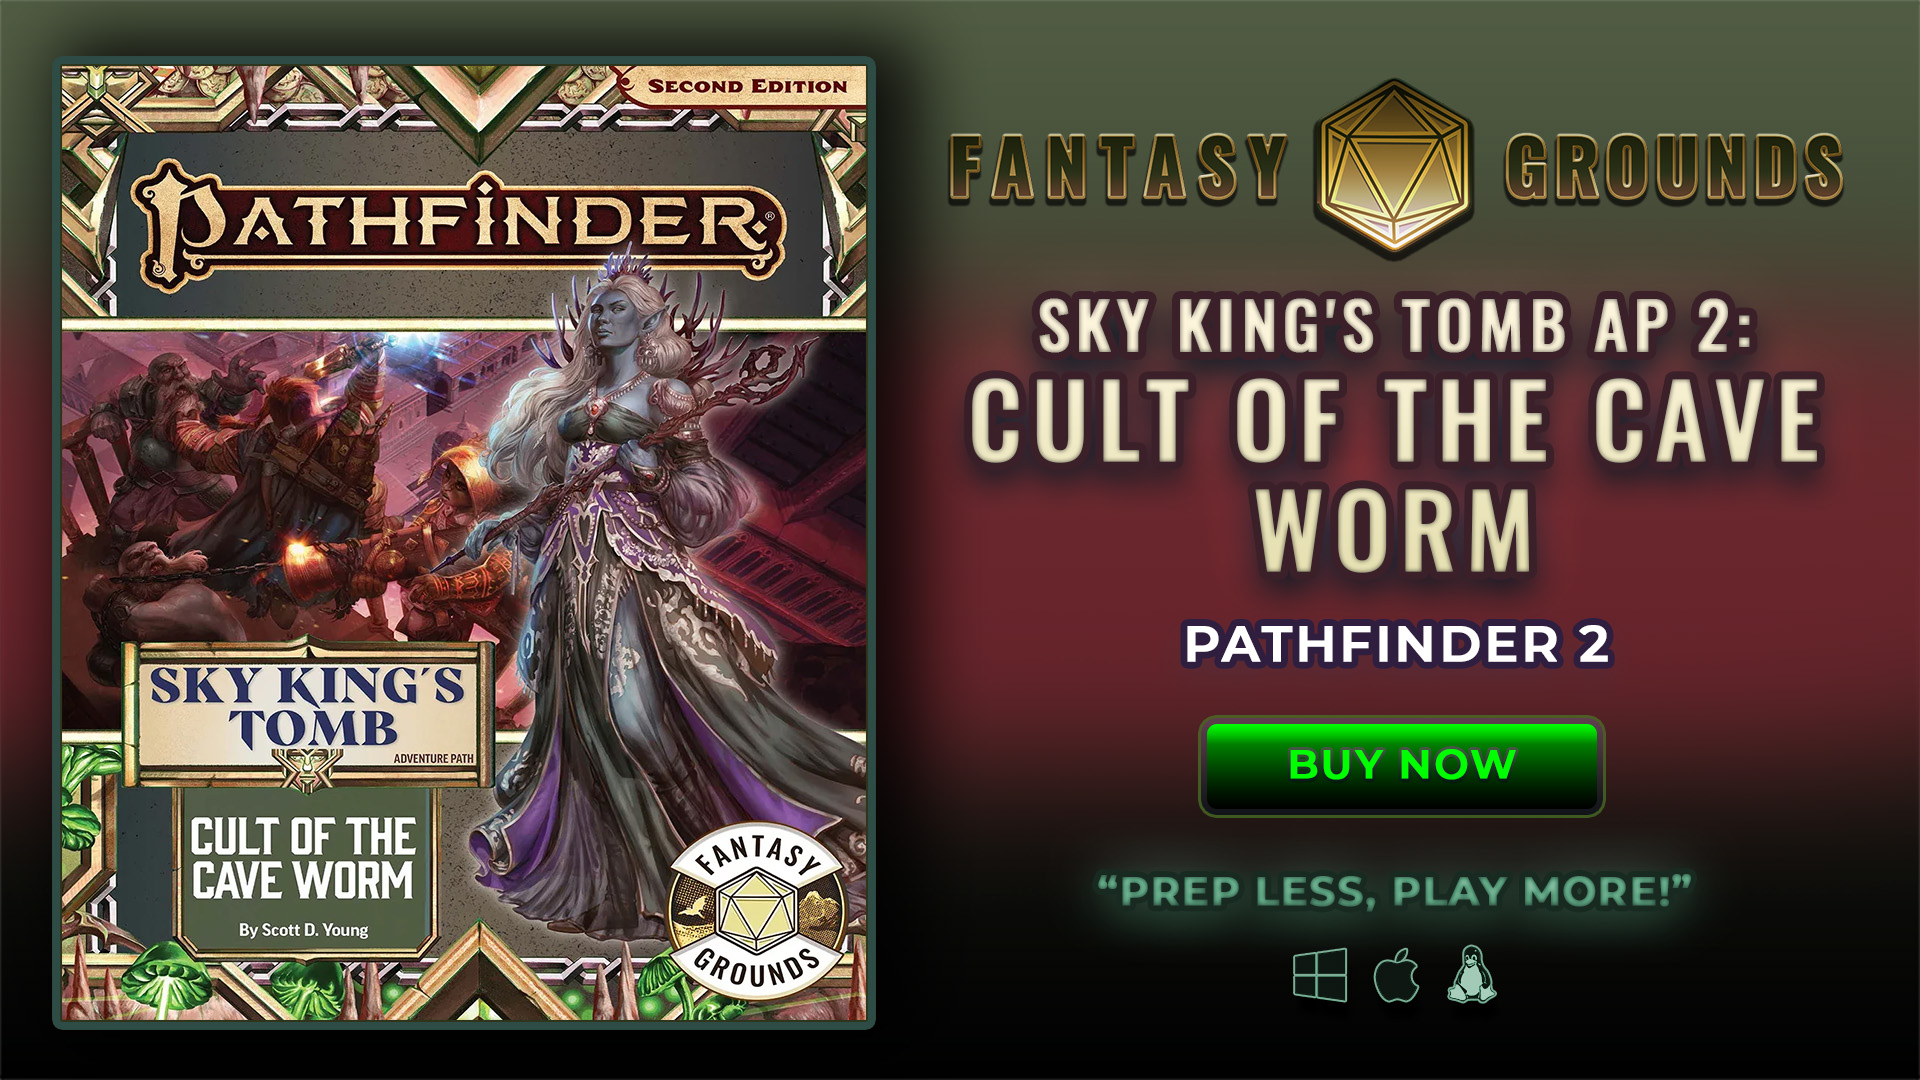 Pathfinder 2 RPG - Sky King's Tomb AP 2 Cult of the Cave Worm (PZOSMWPZO90194FG).jpg